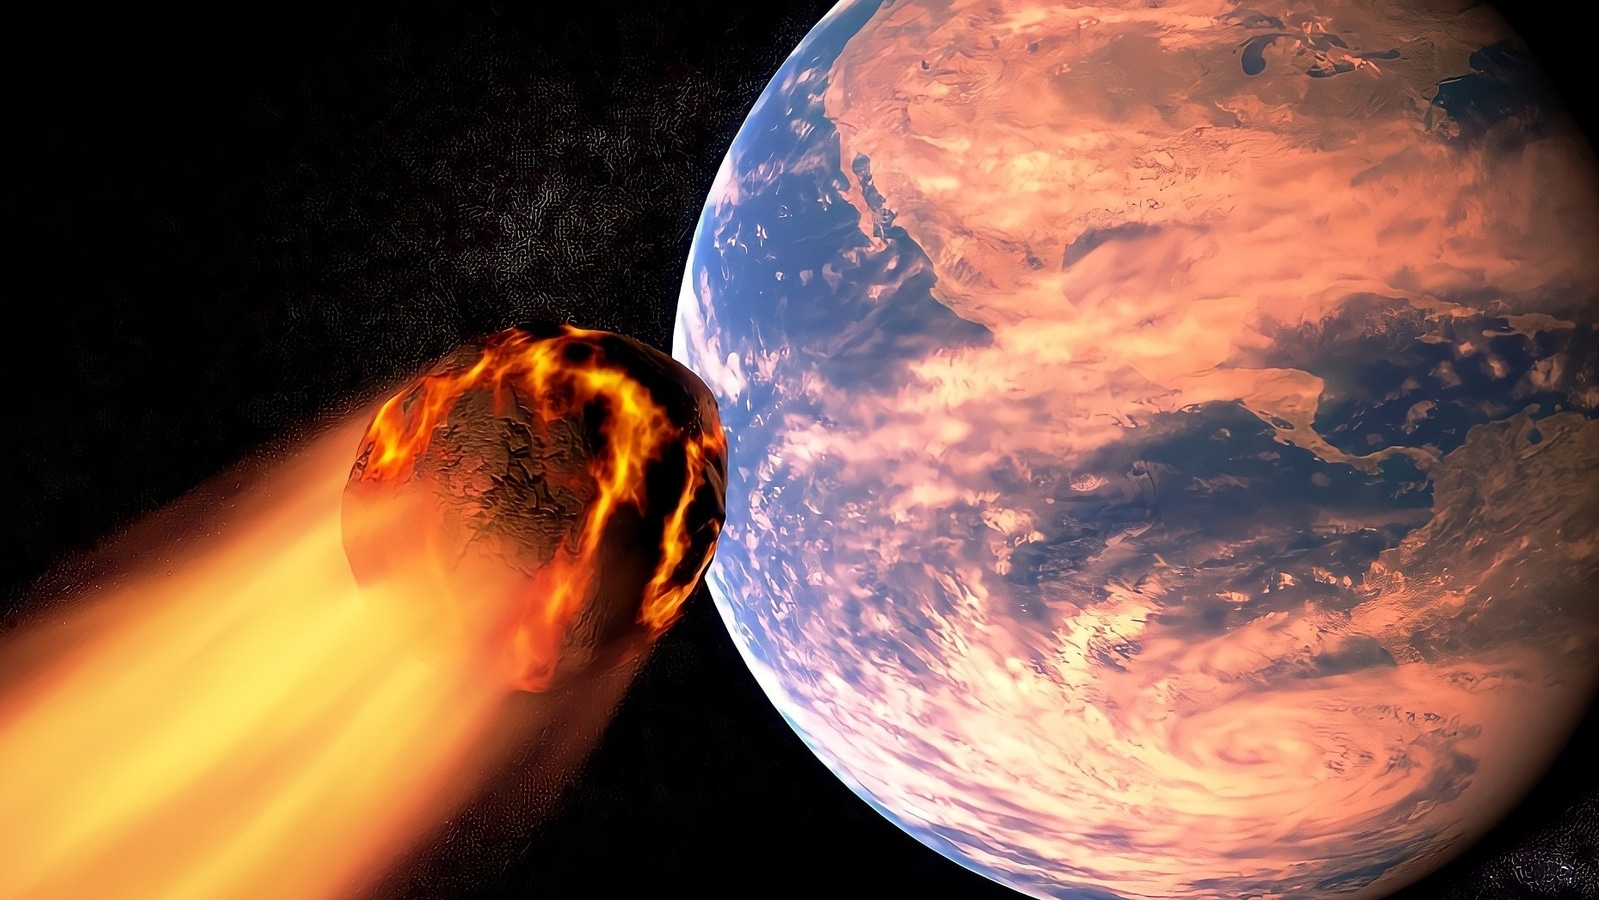 beware-a-100-foot-wide-killer-asteroid-is-heading-towards-the-earth-says-nasa